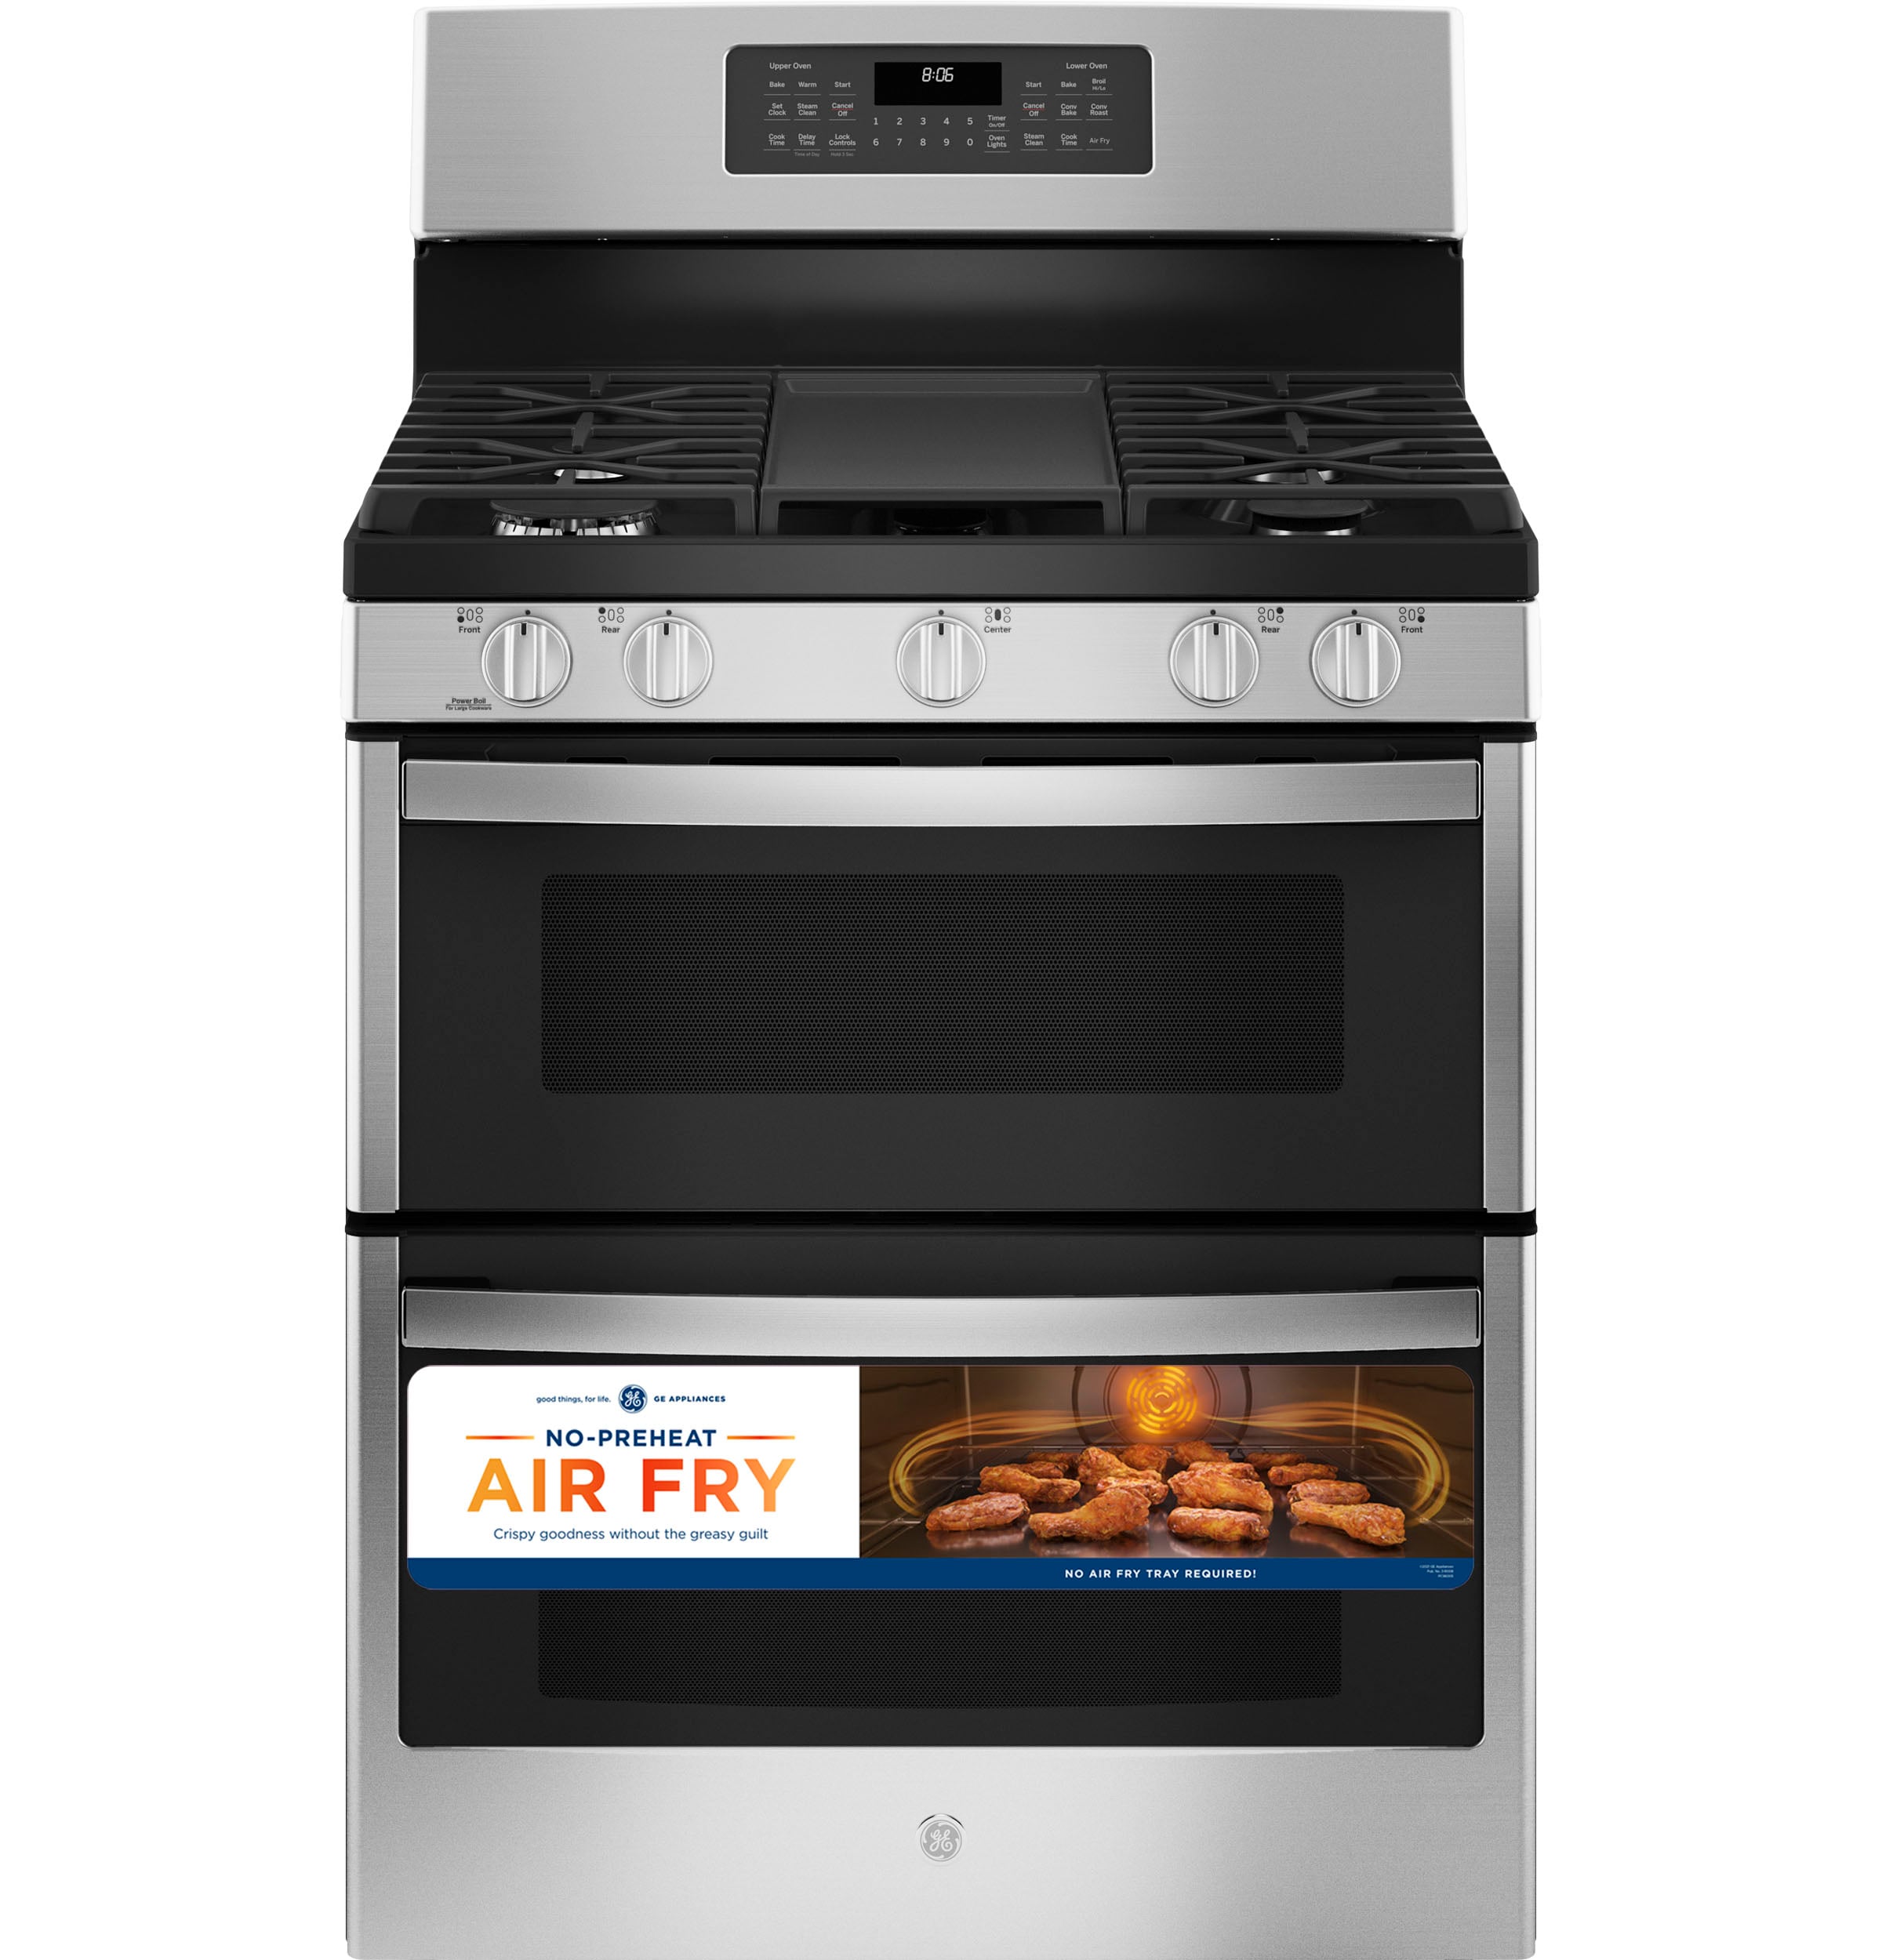 GE Free-Standing Gas Range Picks up Steam for Natural Cleaning